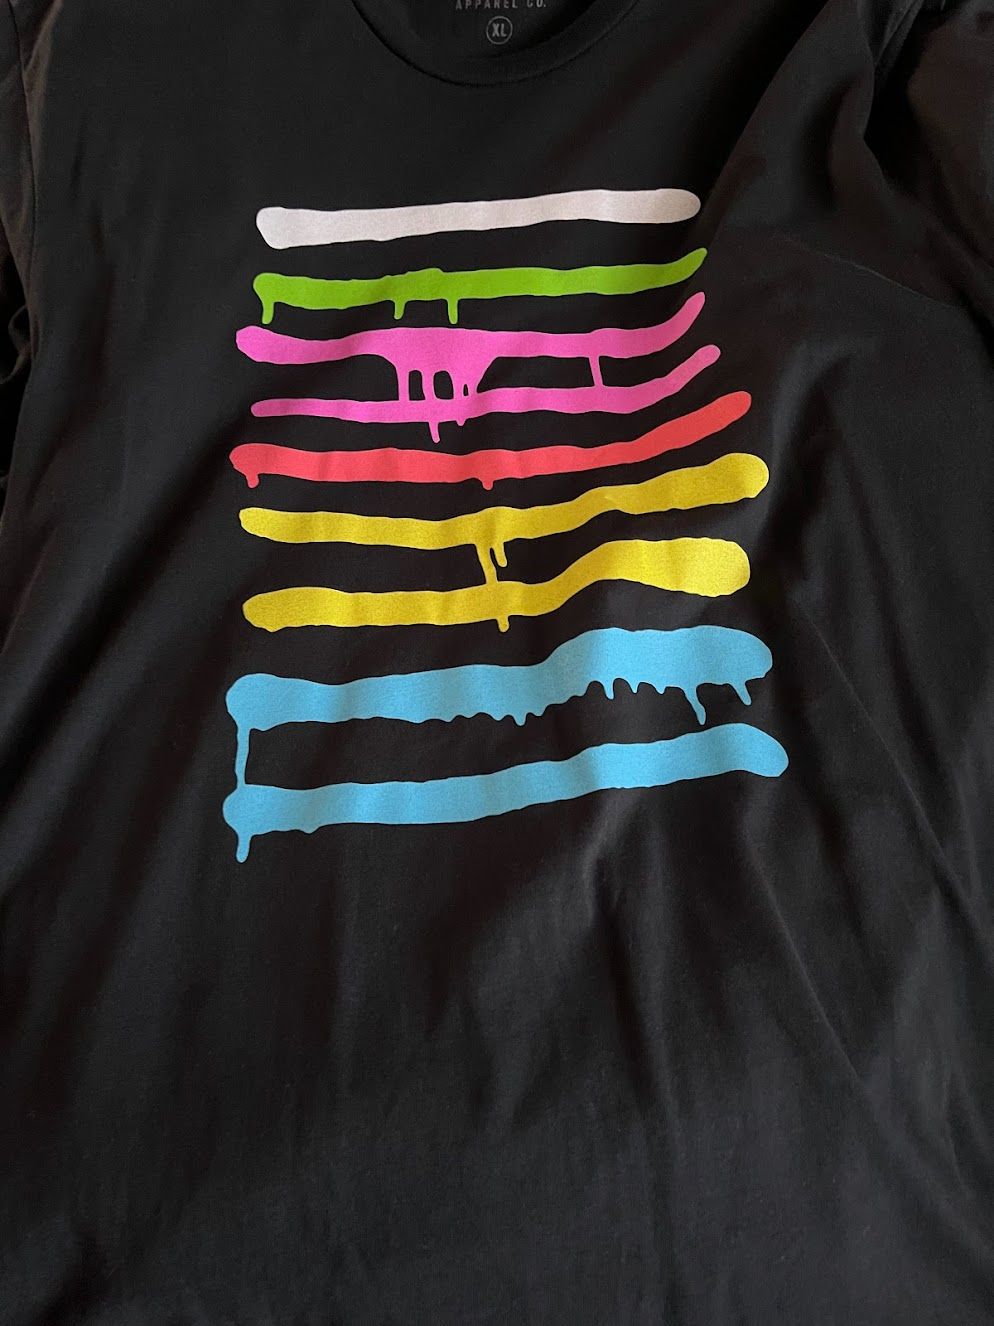 Multi coloured lines of spray paint t-shirt from Wyndham Walls